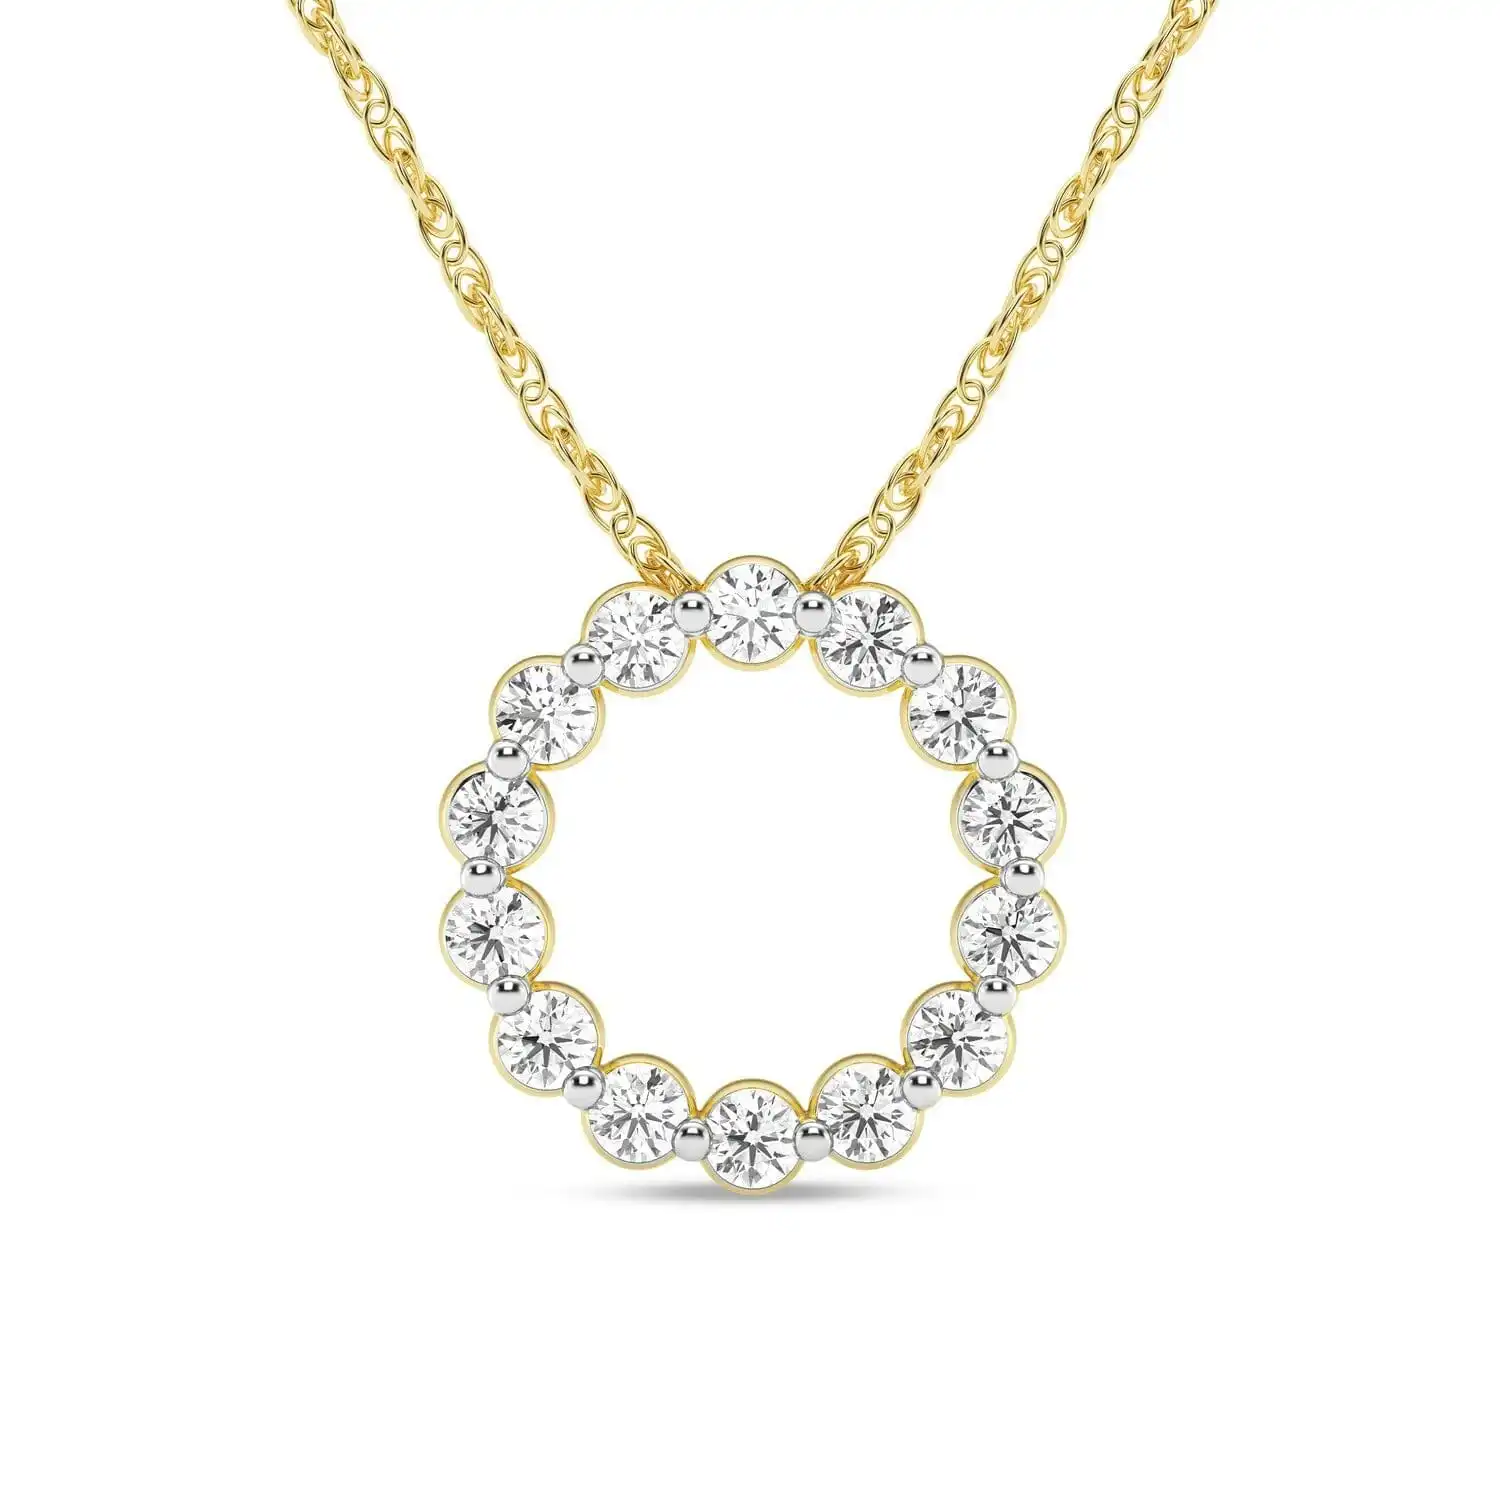 Meera Circle of Love Necklace with 1/2ct of Laboratory Grown Diamonds in 9ct Yellow Gold